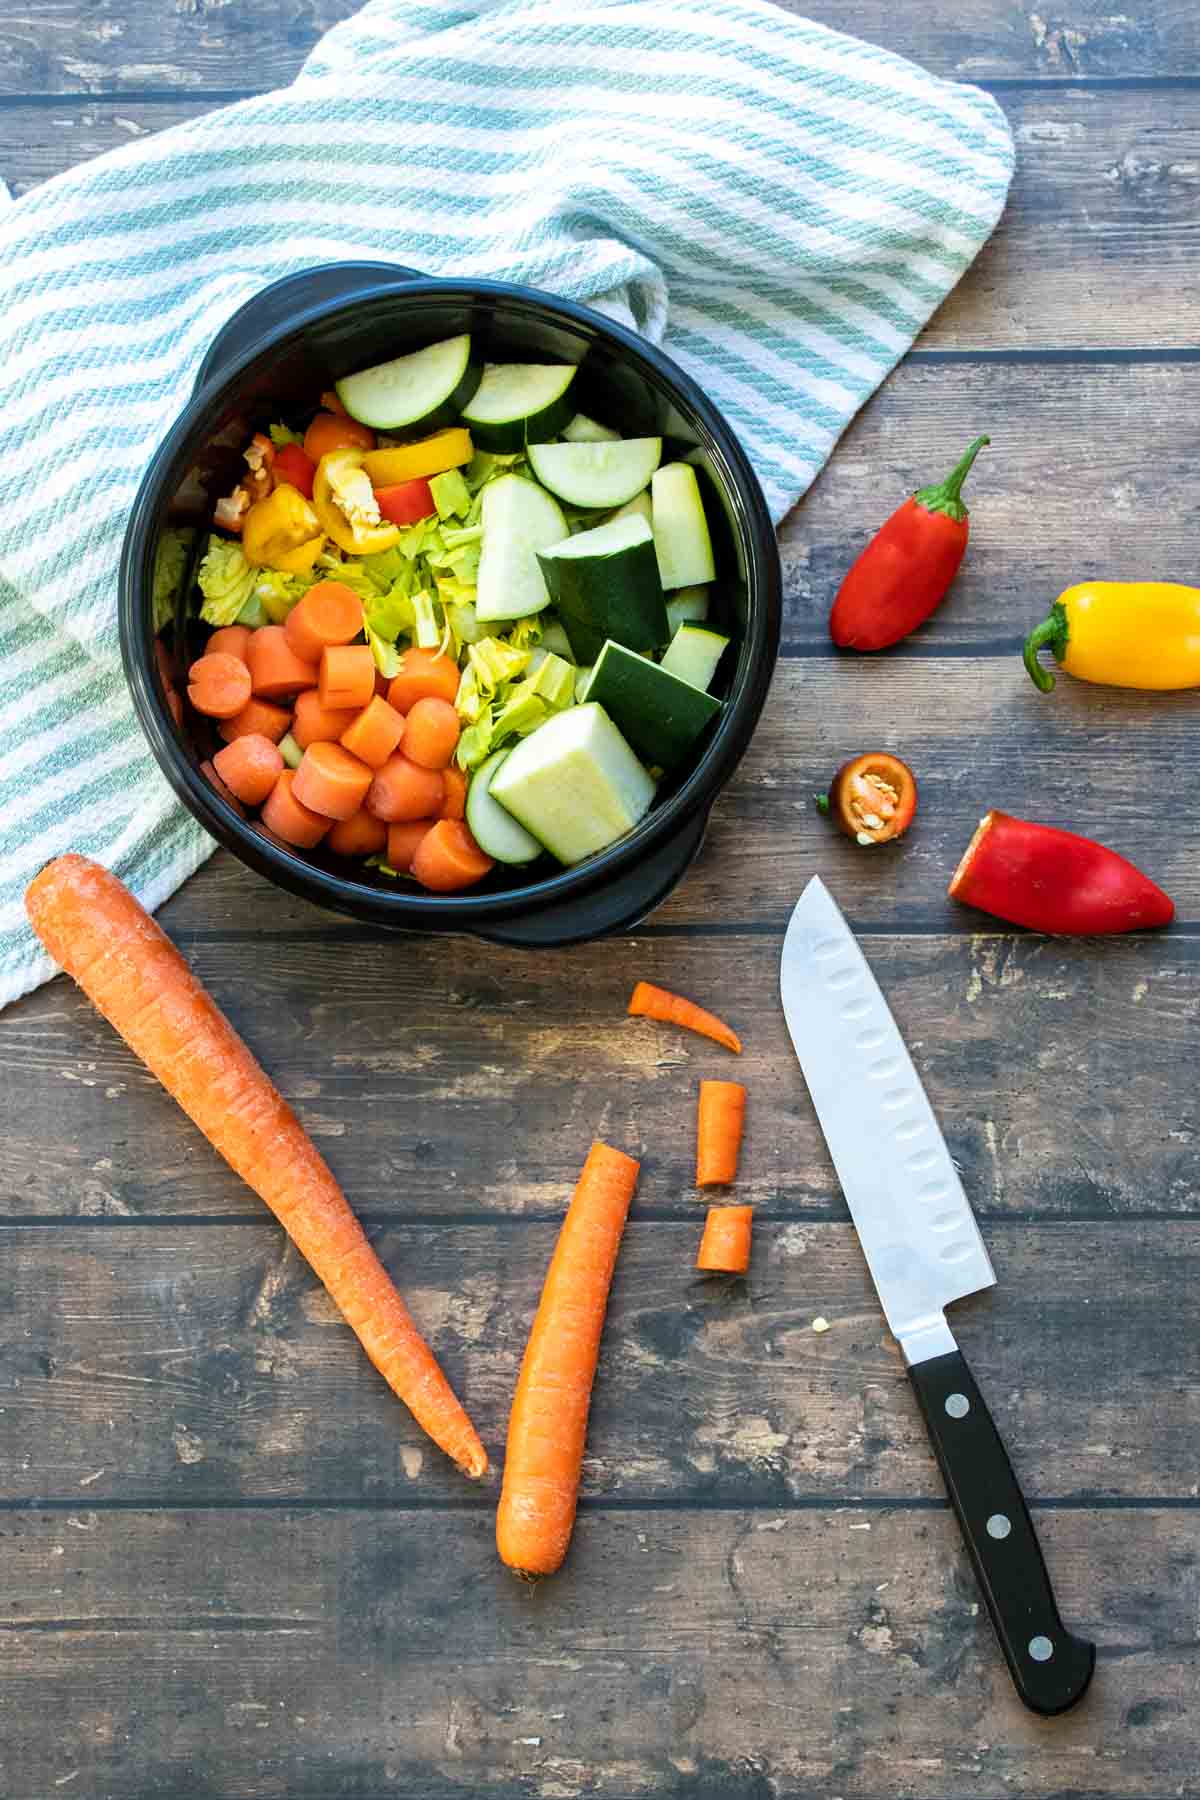 Knife next to veggies being chopped and put into a black container.